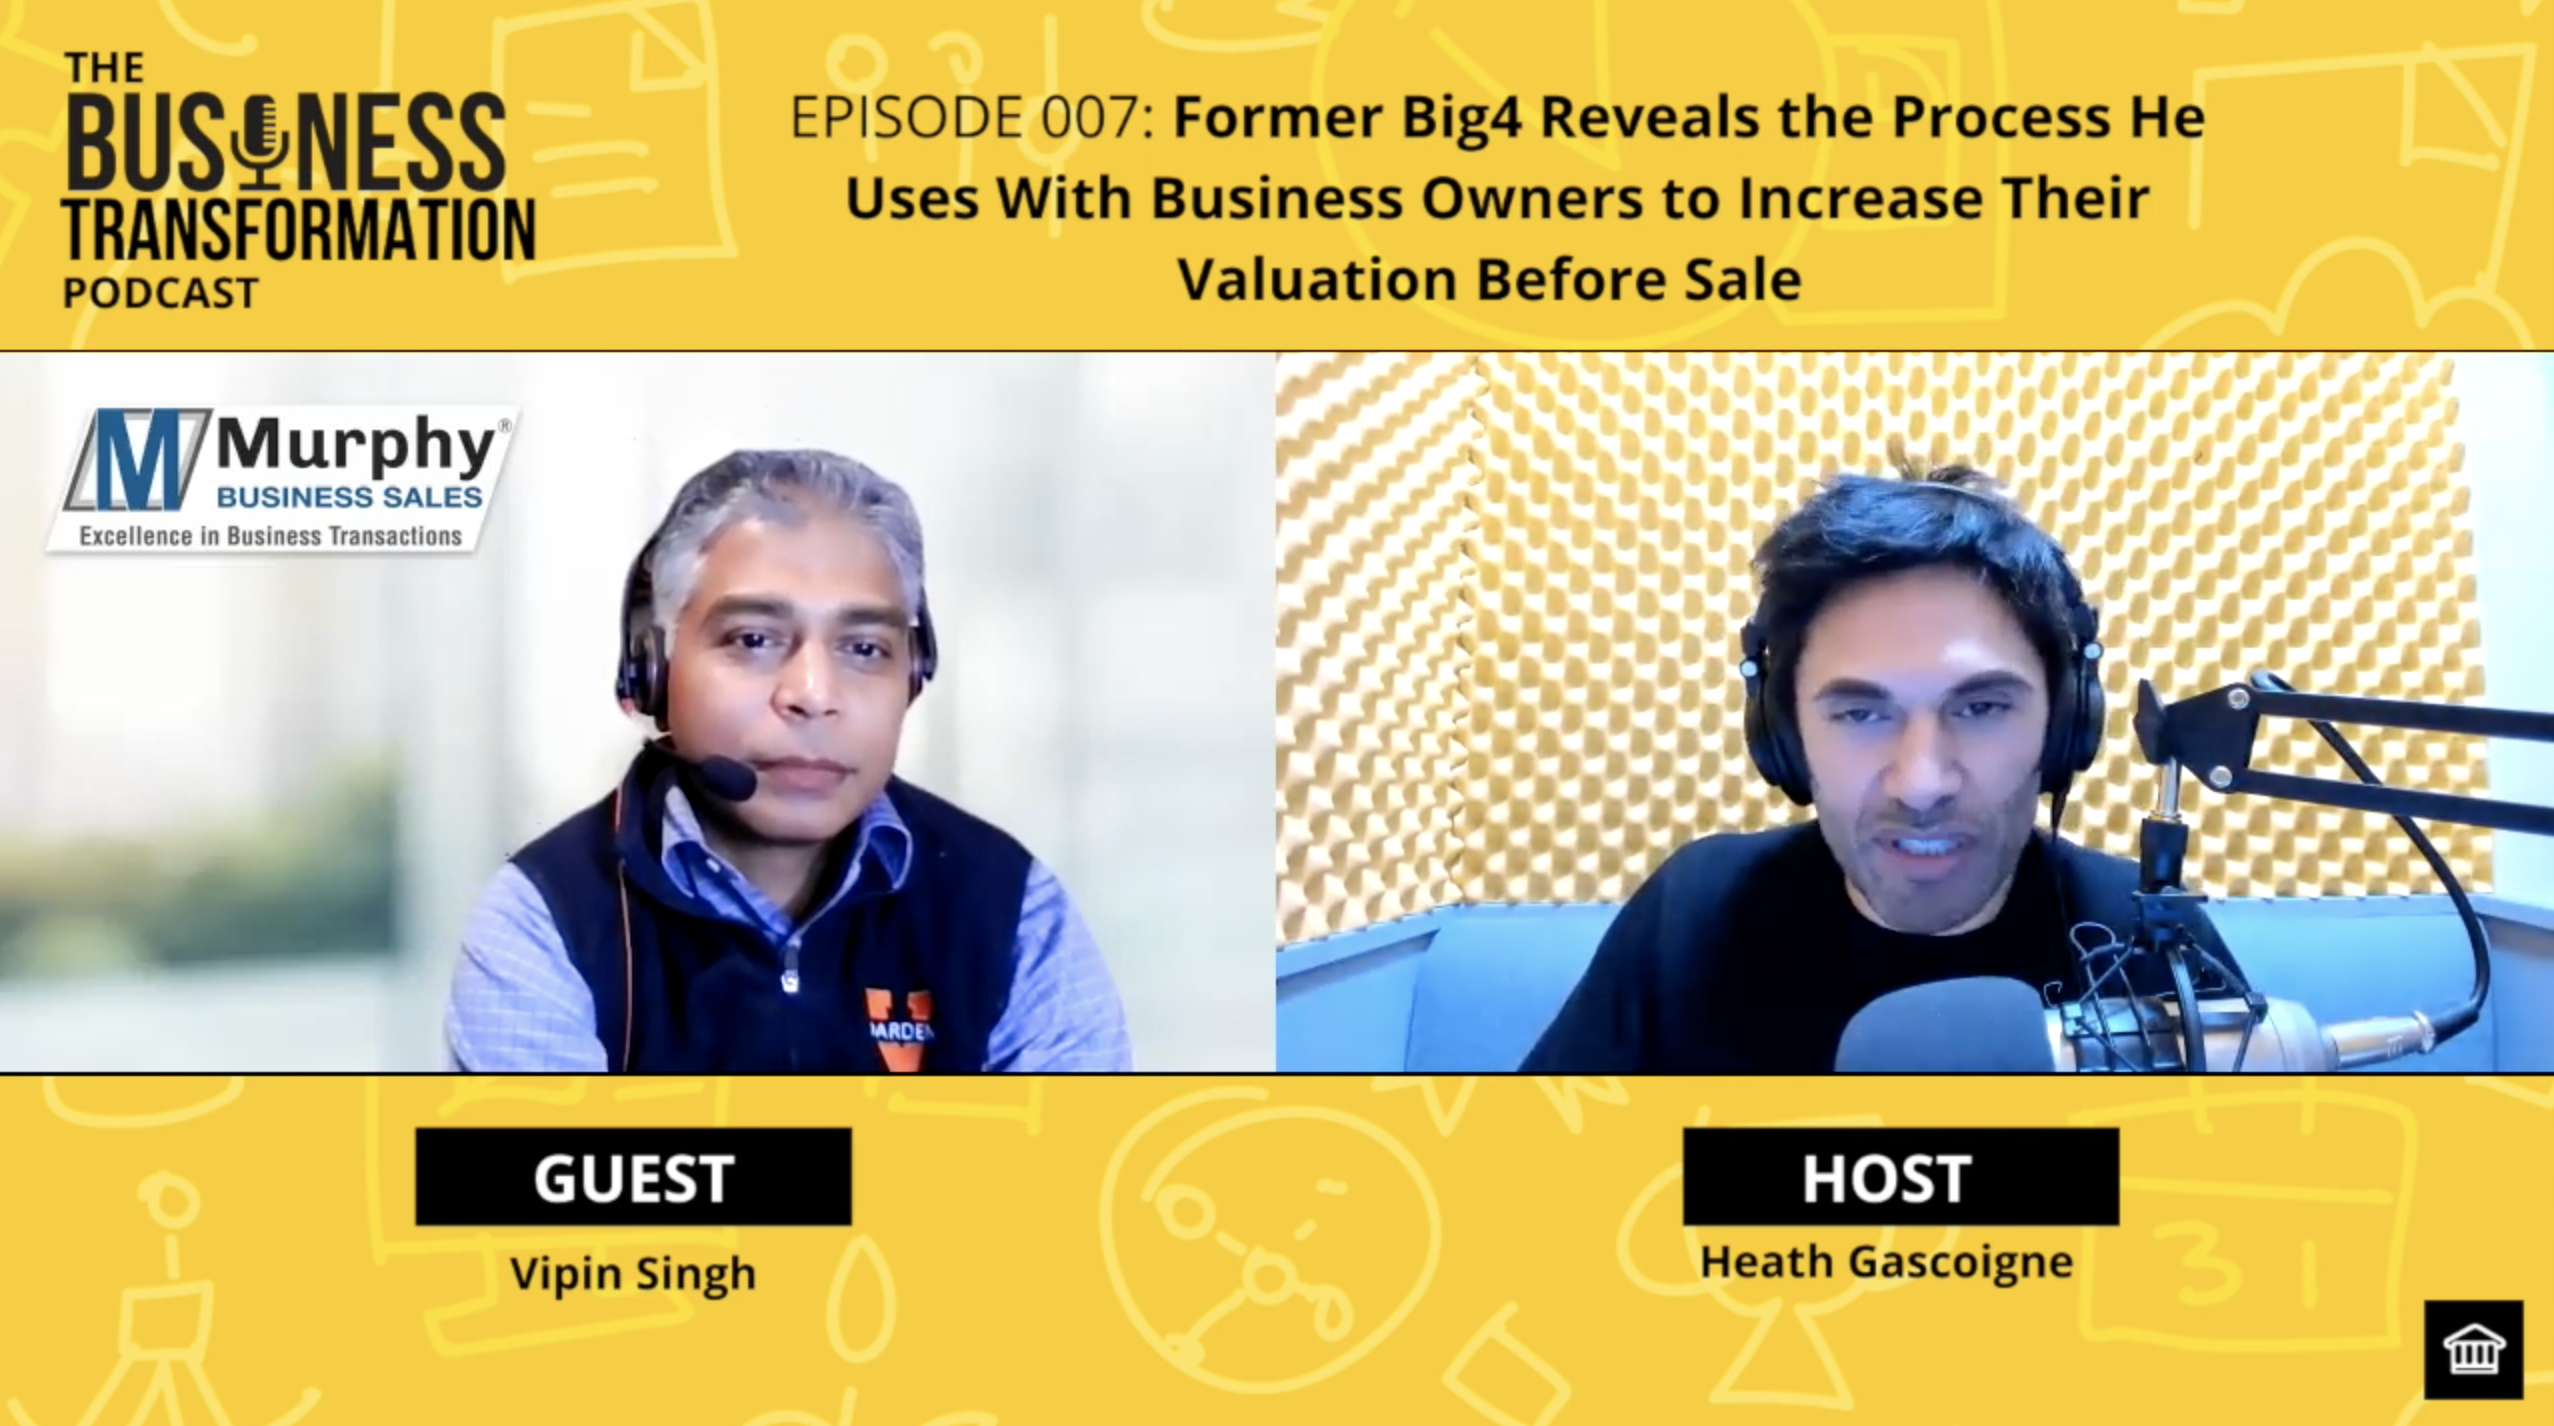 The Business Transformation Podcast Episode 007 Vipin Singh